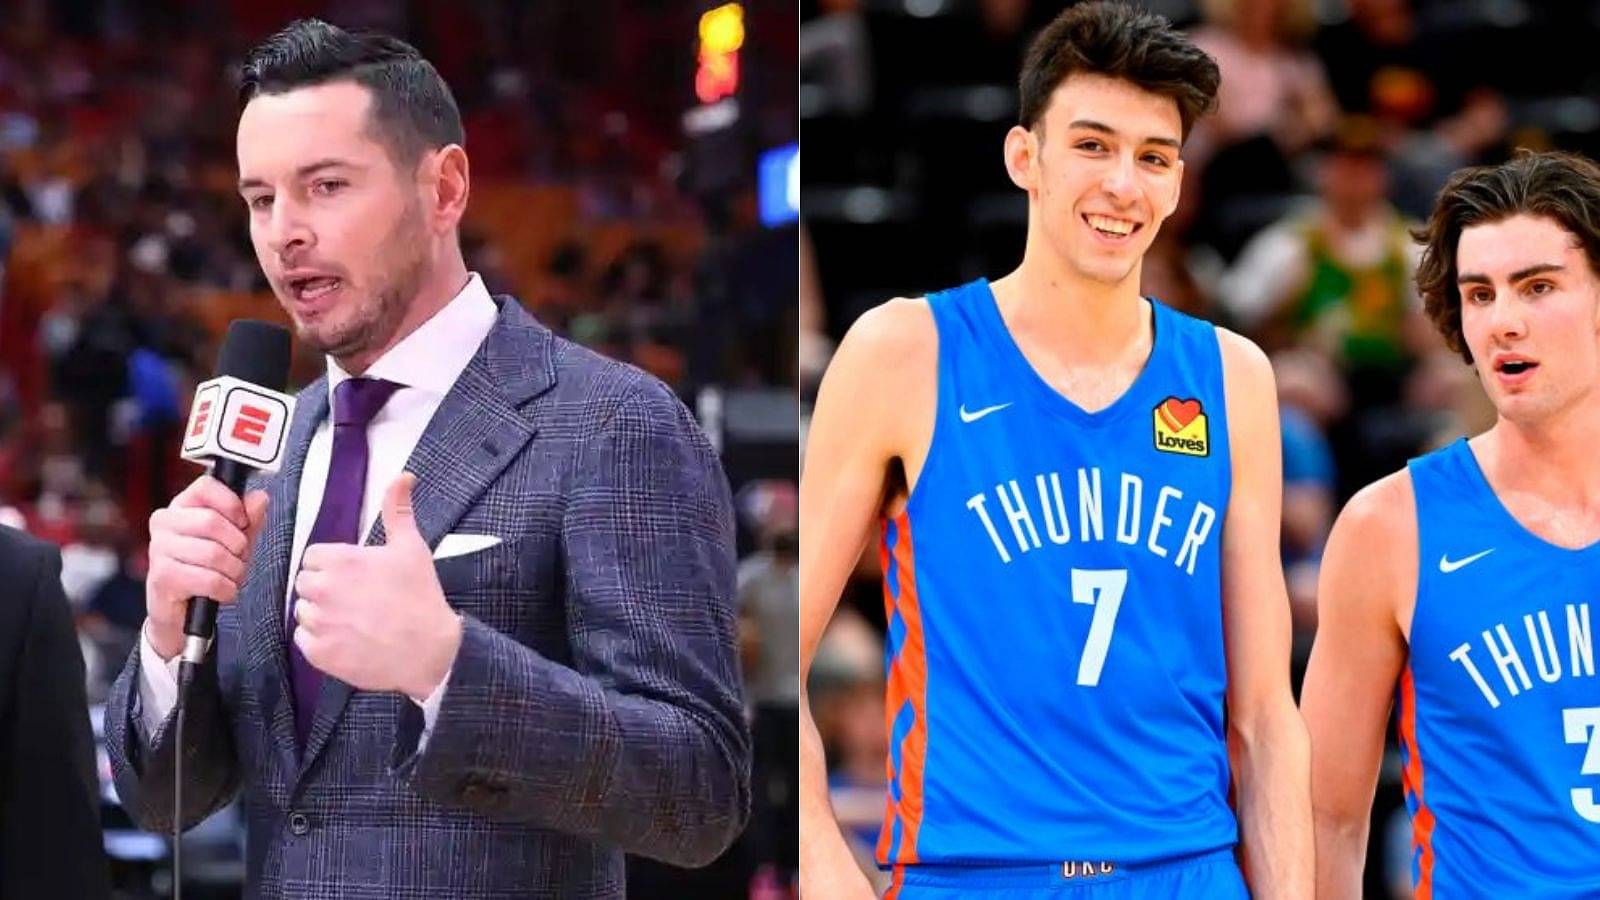 “Chet Holmgren has discovered tesseract, he could bridge space and time”: JJ Redick is in awe of OKC Thunder’s 7-foot wonder, compares him to Giannis Antetokounmpo